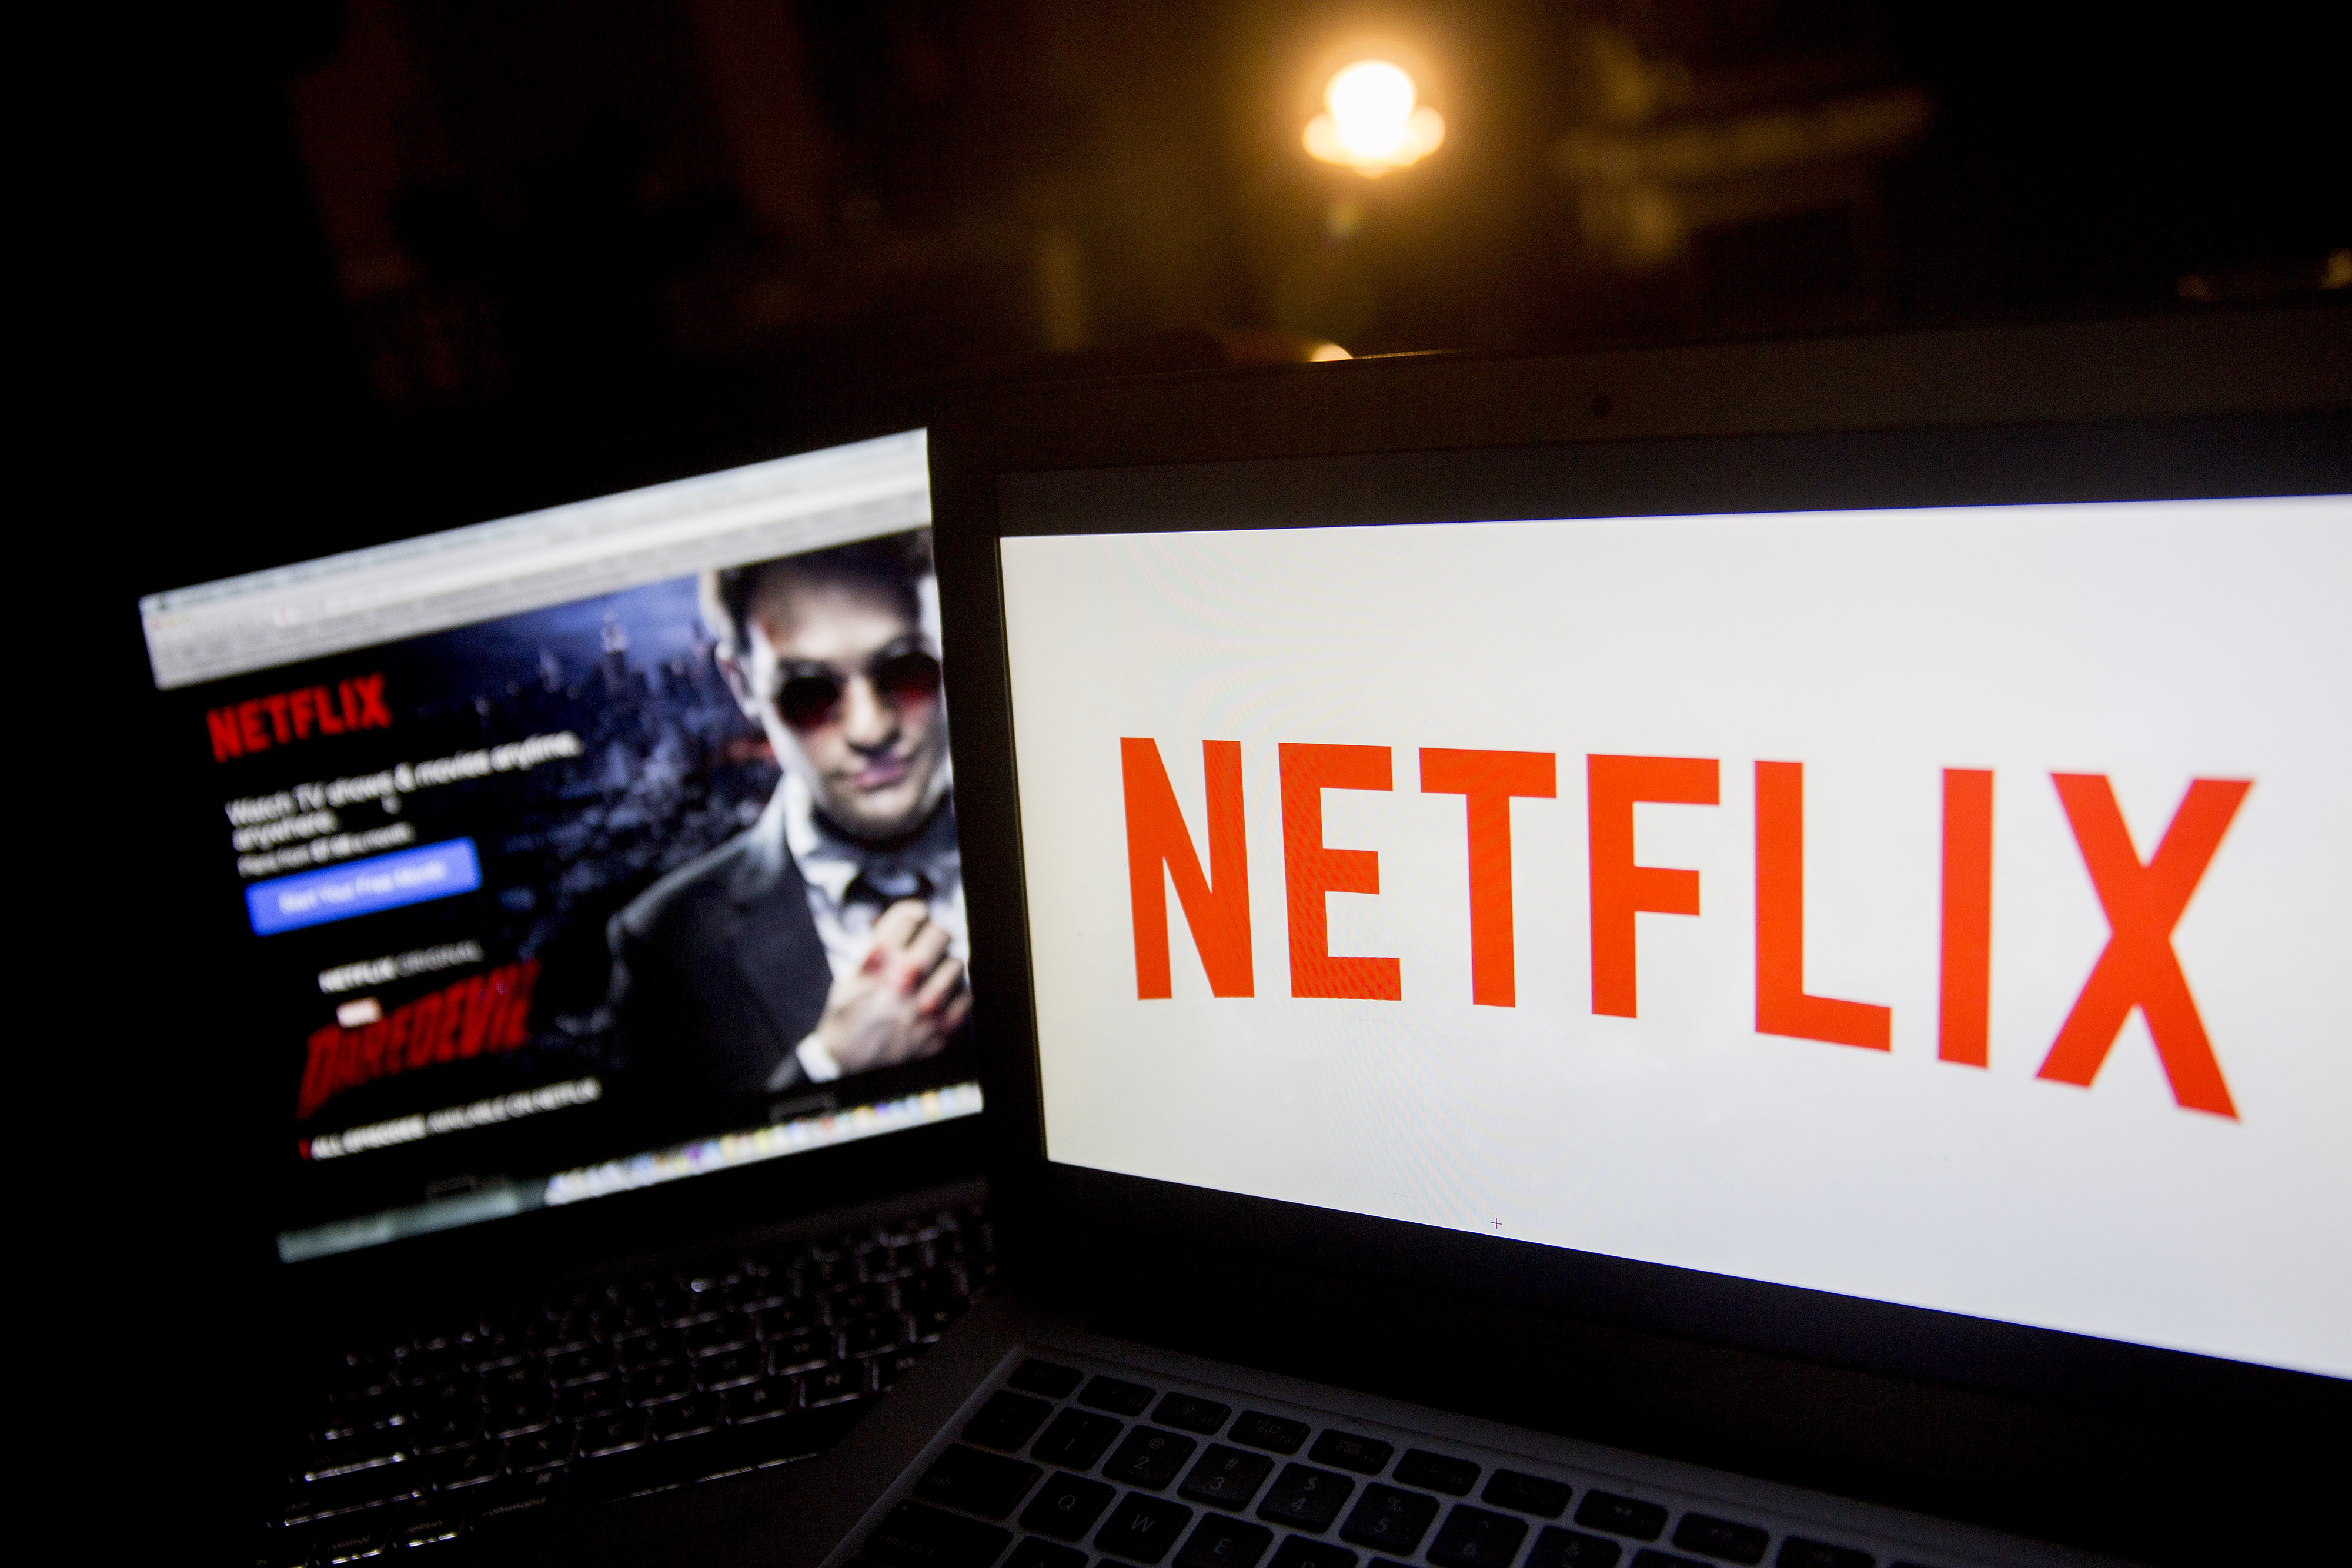 The Netflix Inc. logo and website are displayed on laptop computers for a photograph in Washington, D.C., U.S., on Tuesday, April 14, 2015. (Andrew Harrer—Bloomberg/Getty Images)